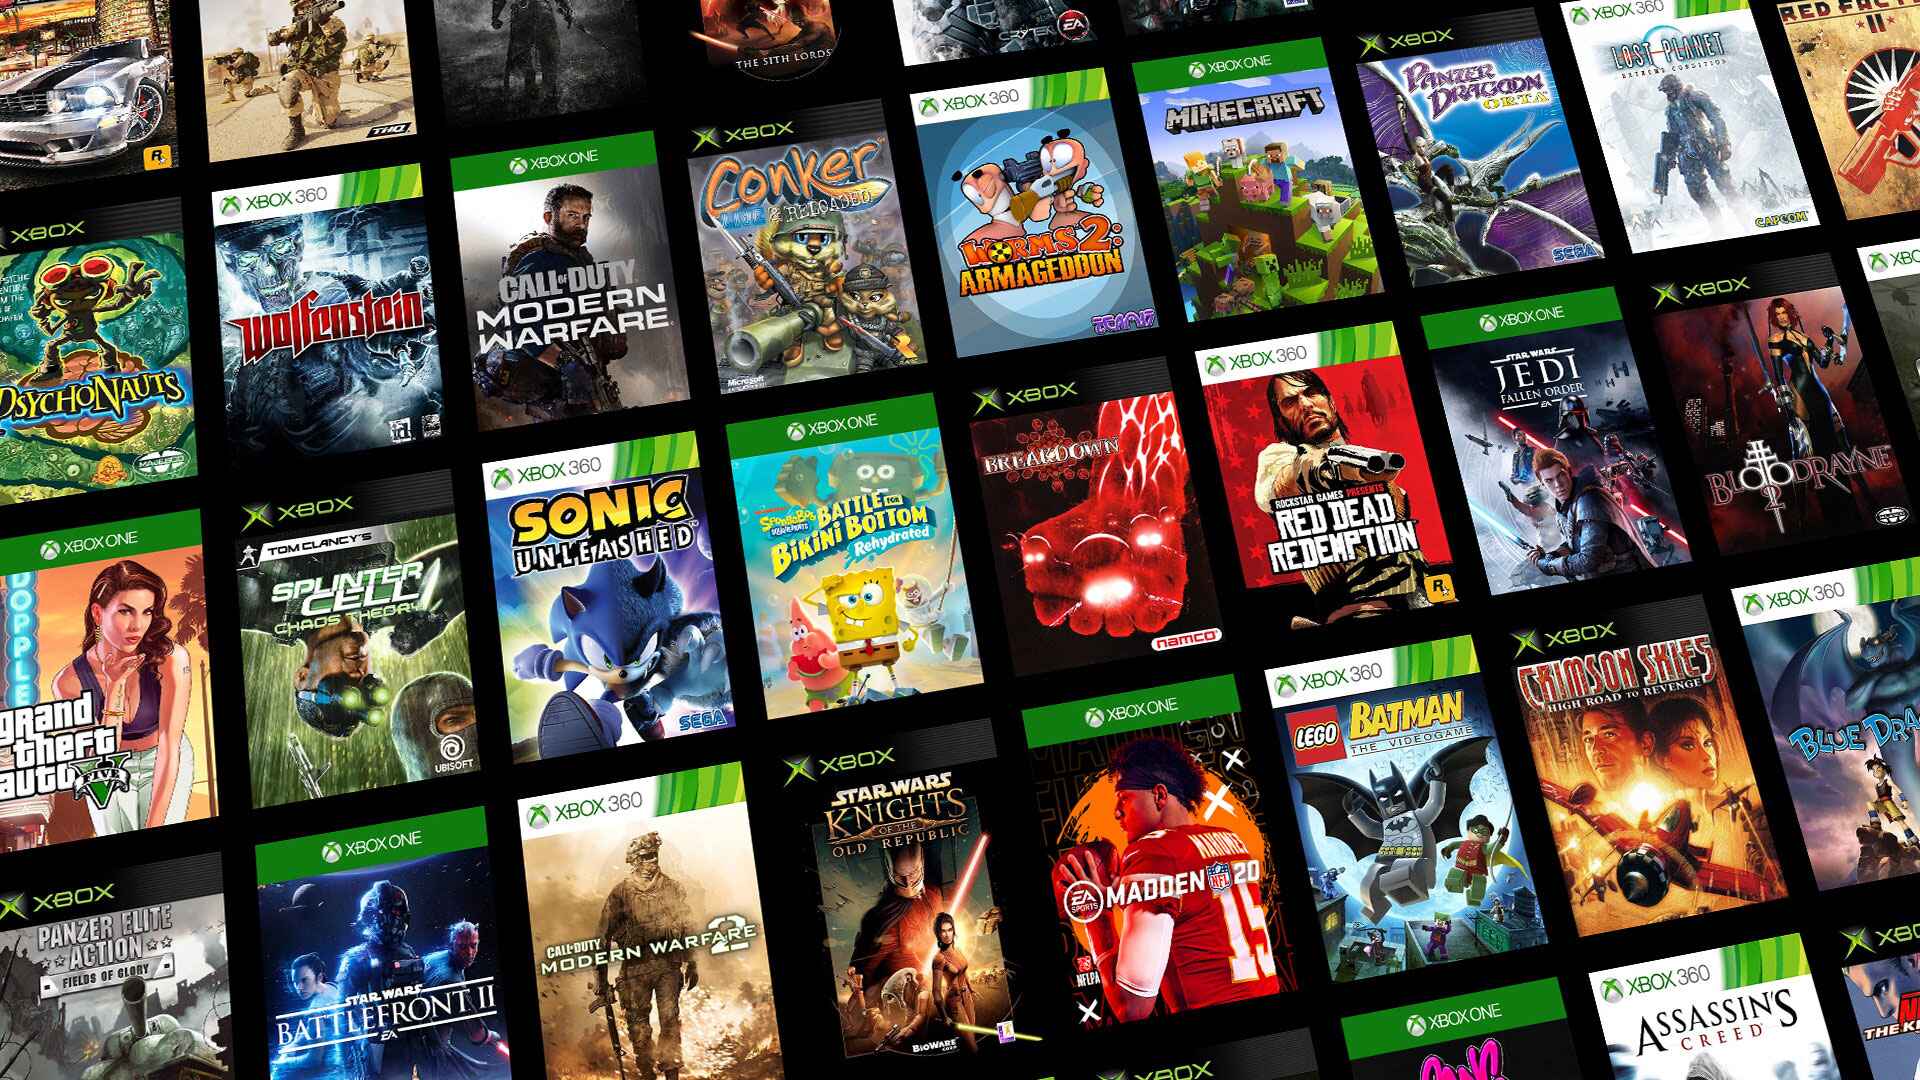 How To Download Games On Xbox One